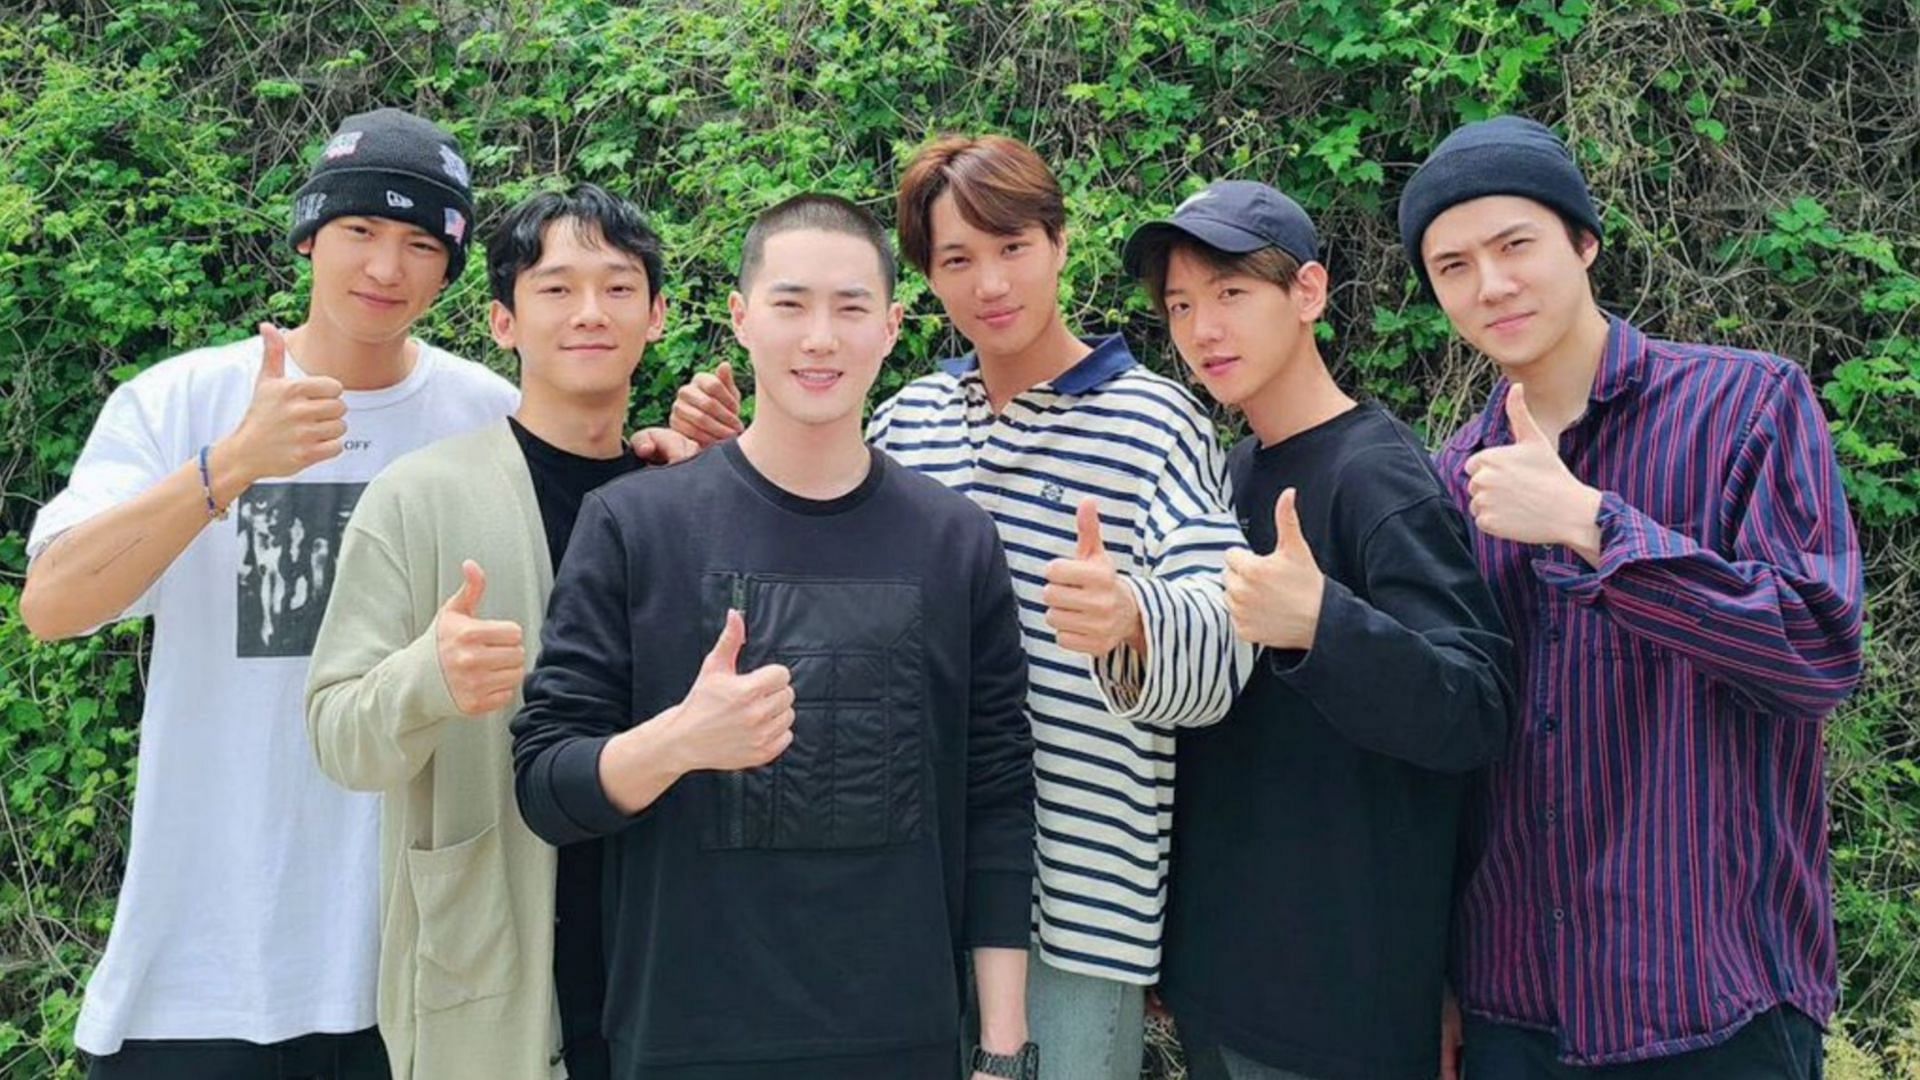 EXO members discharged their leader Suho (center in black) to the military on May 14, 2020. He returned in February 2022. (Image via twitter/@kyungsoouldier)